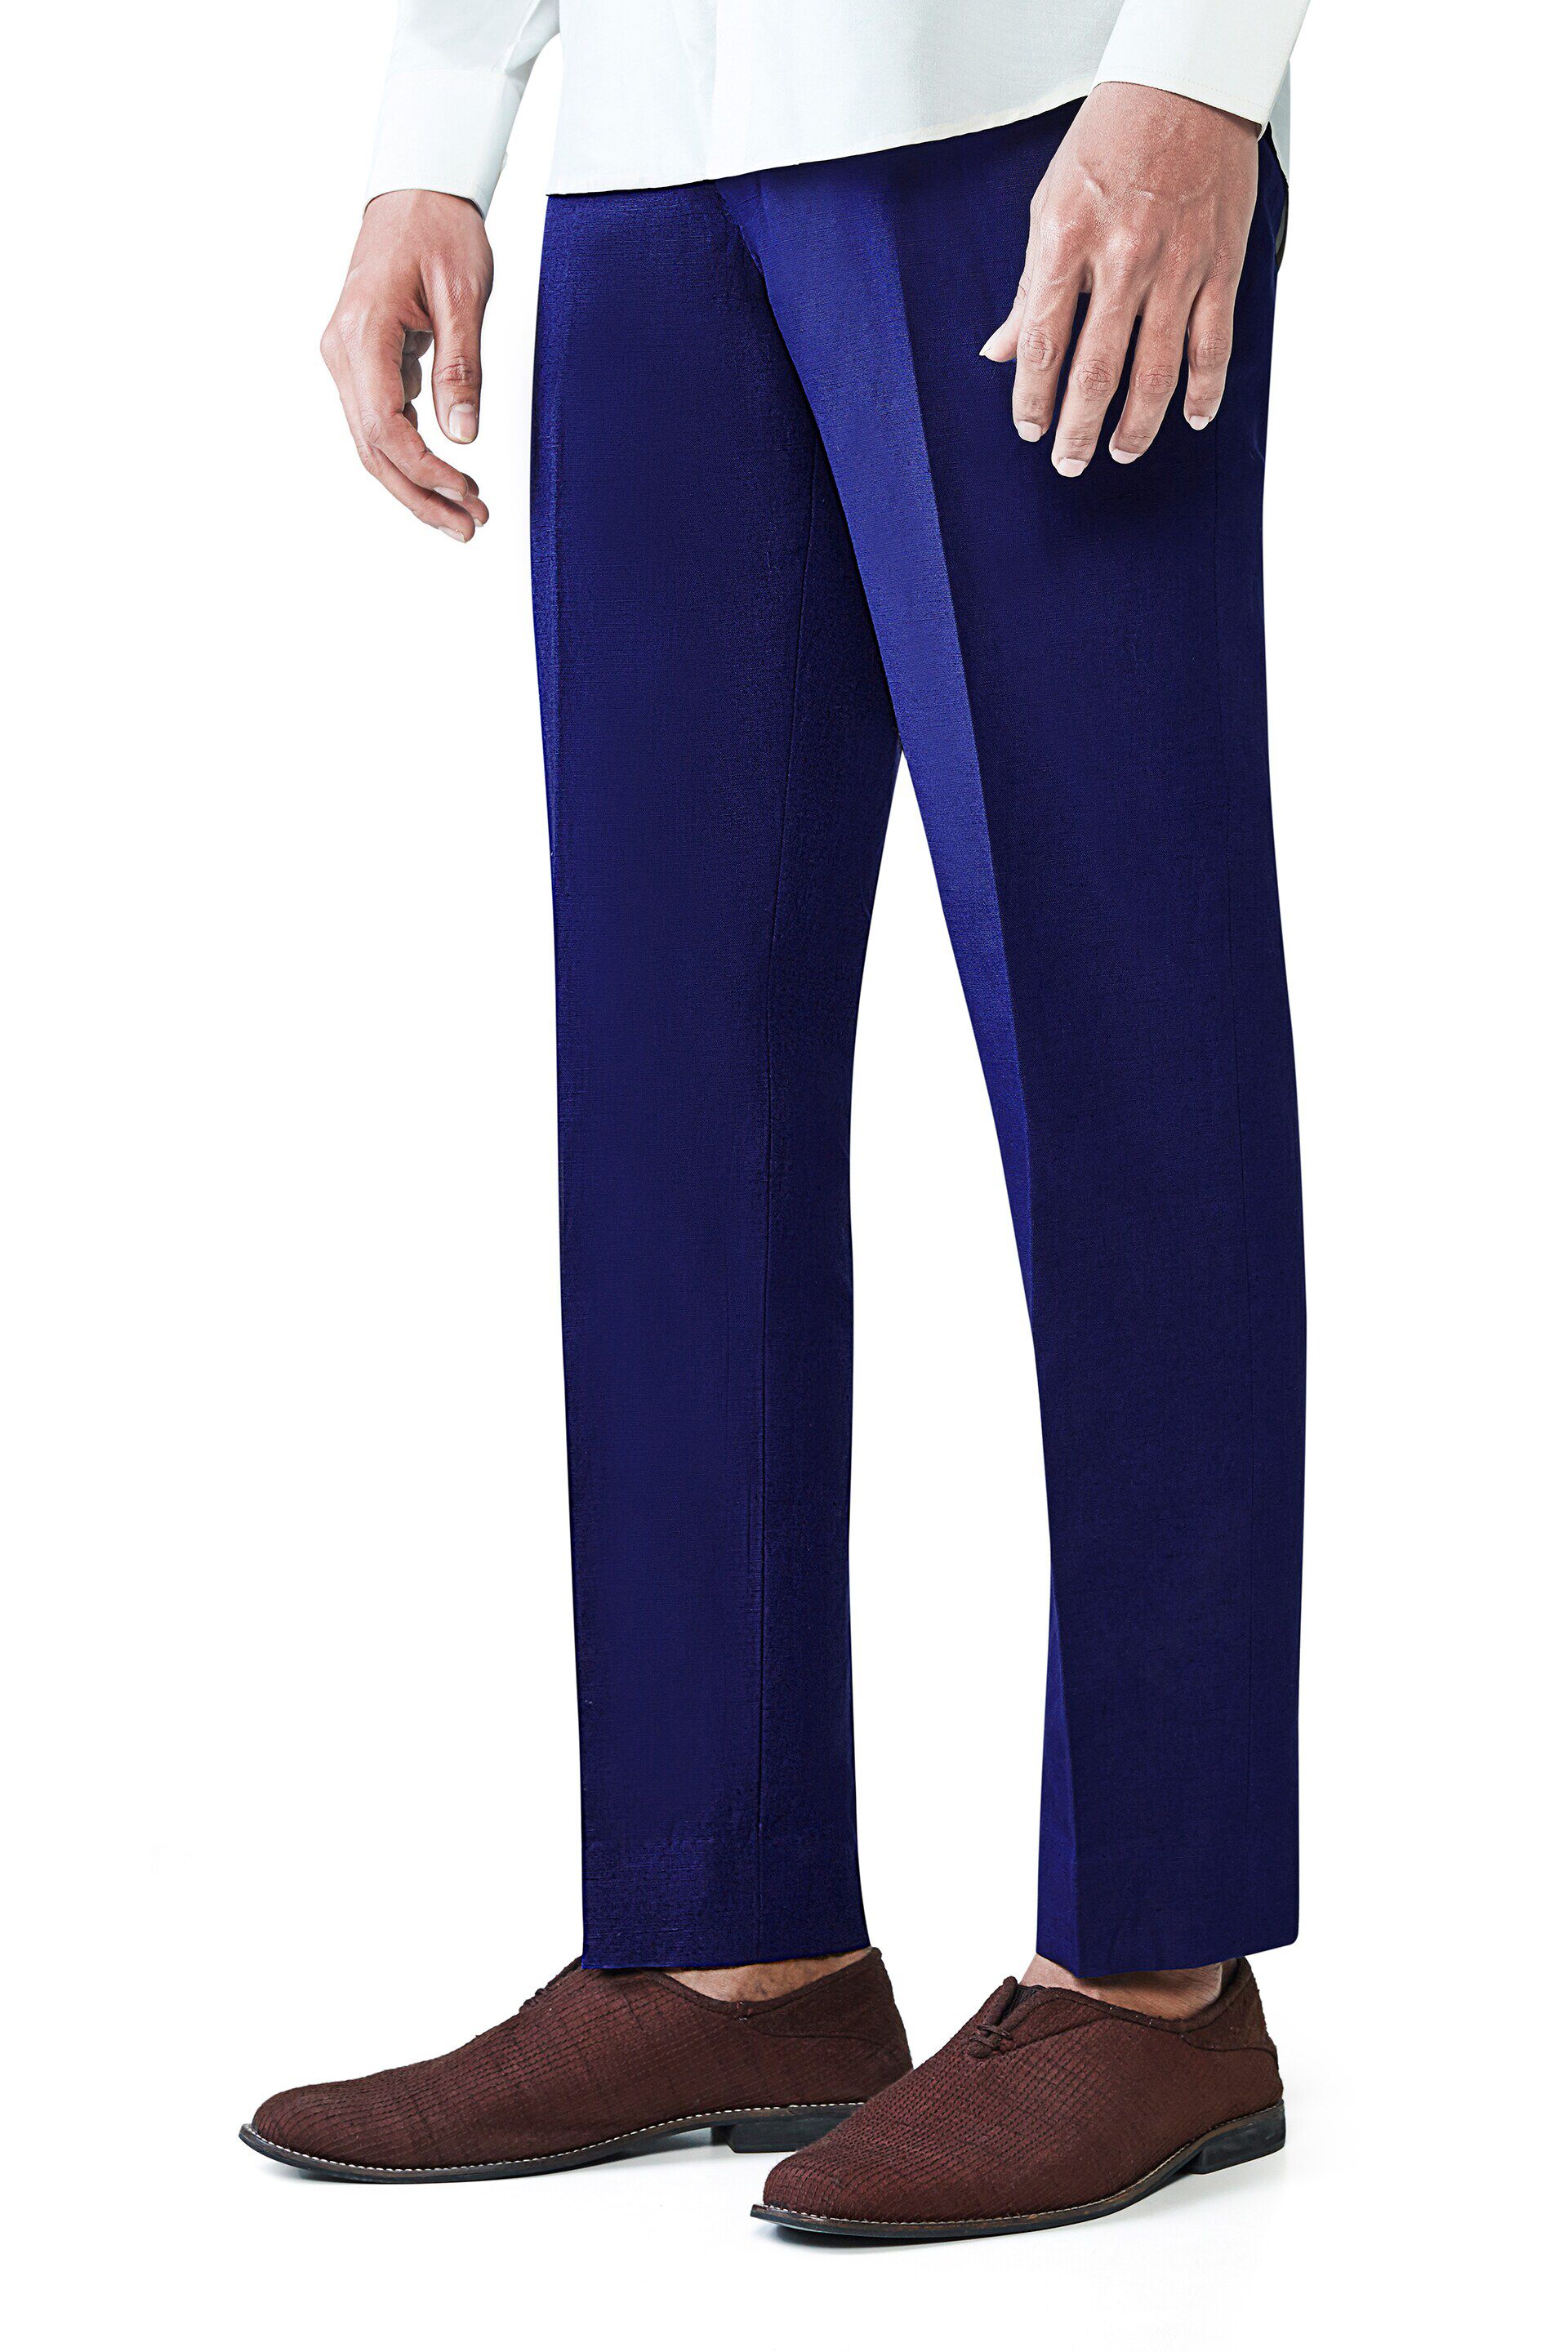 Navy Blue Pant  Buy Navy Blue Pant online in India